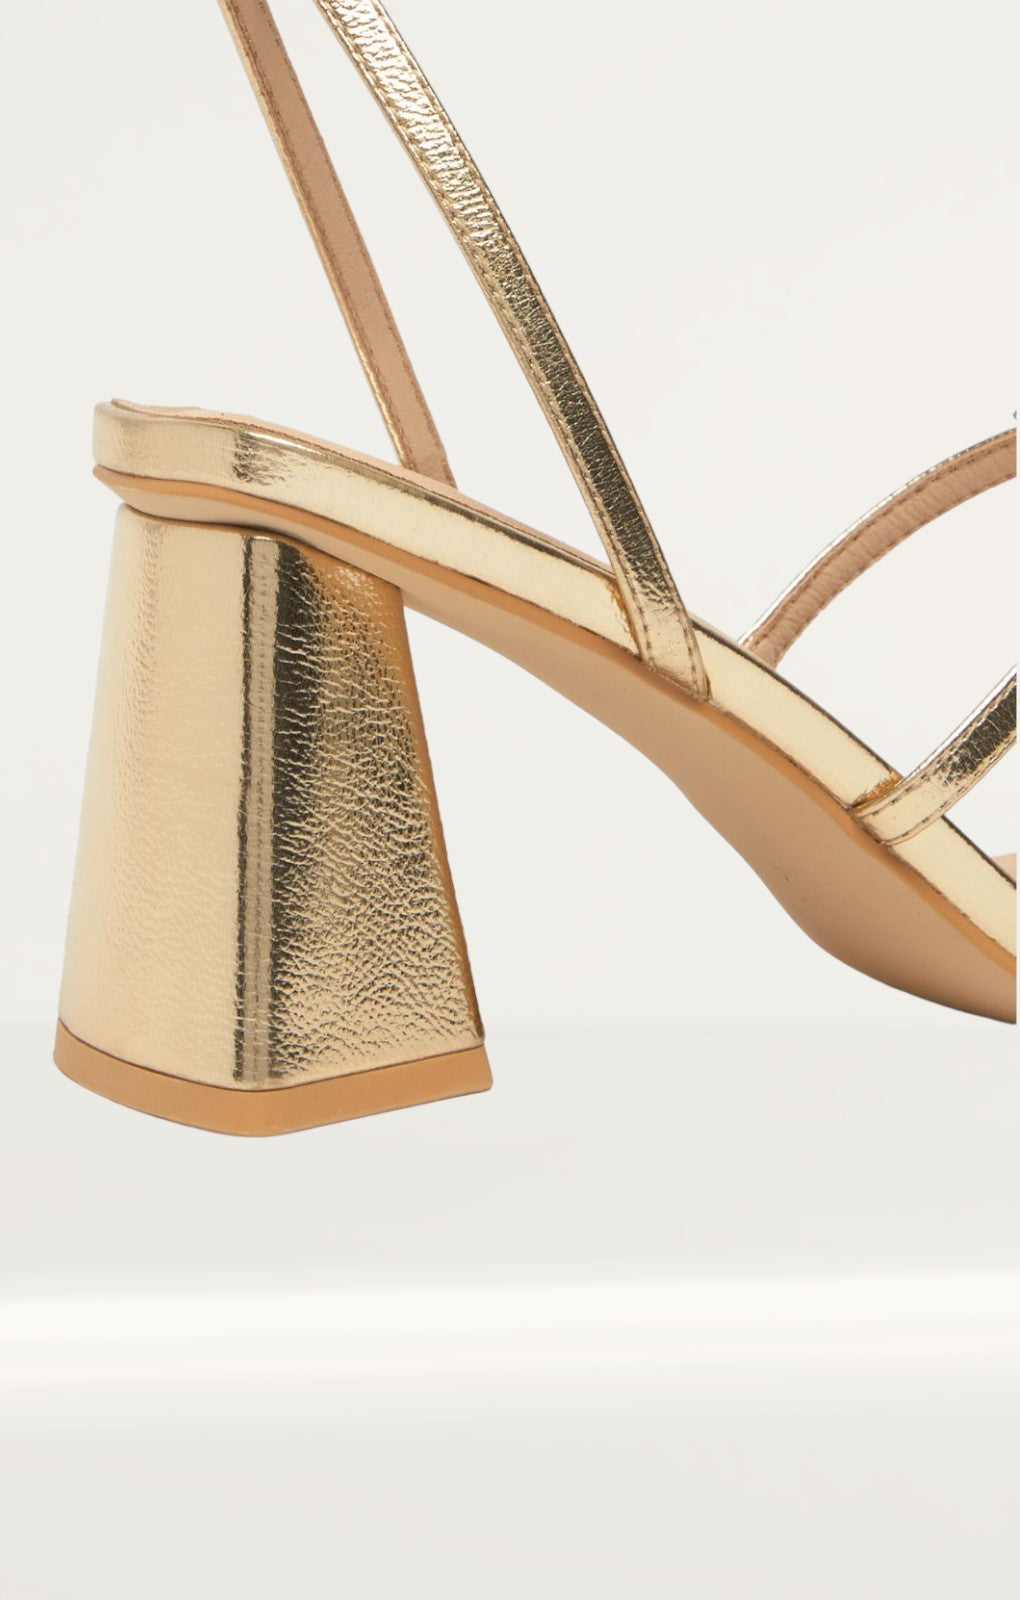 Schuh Samantha Block High Heels in Gold product image